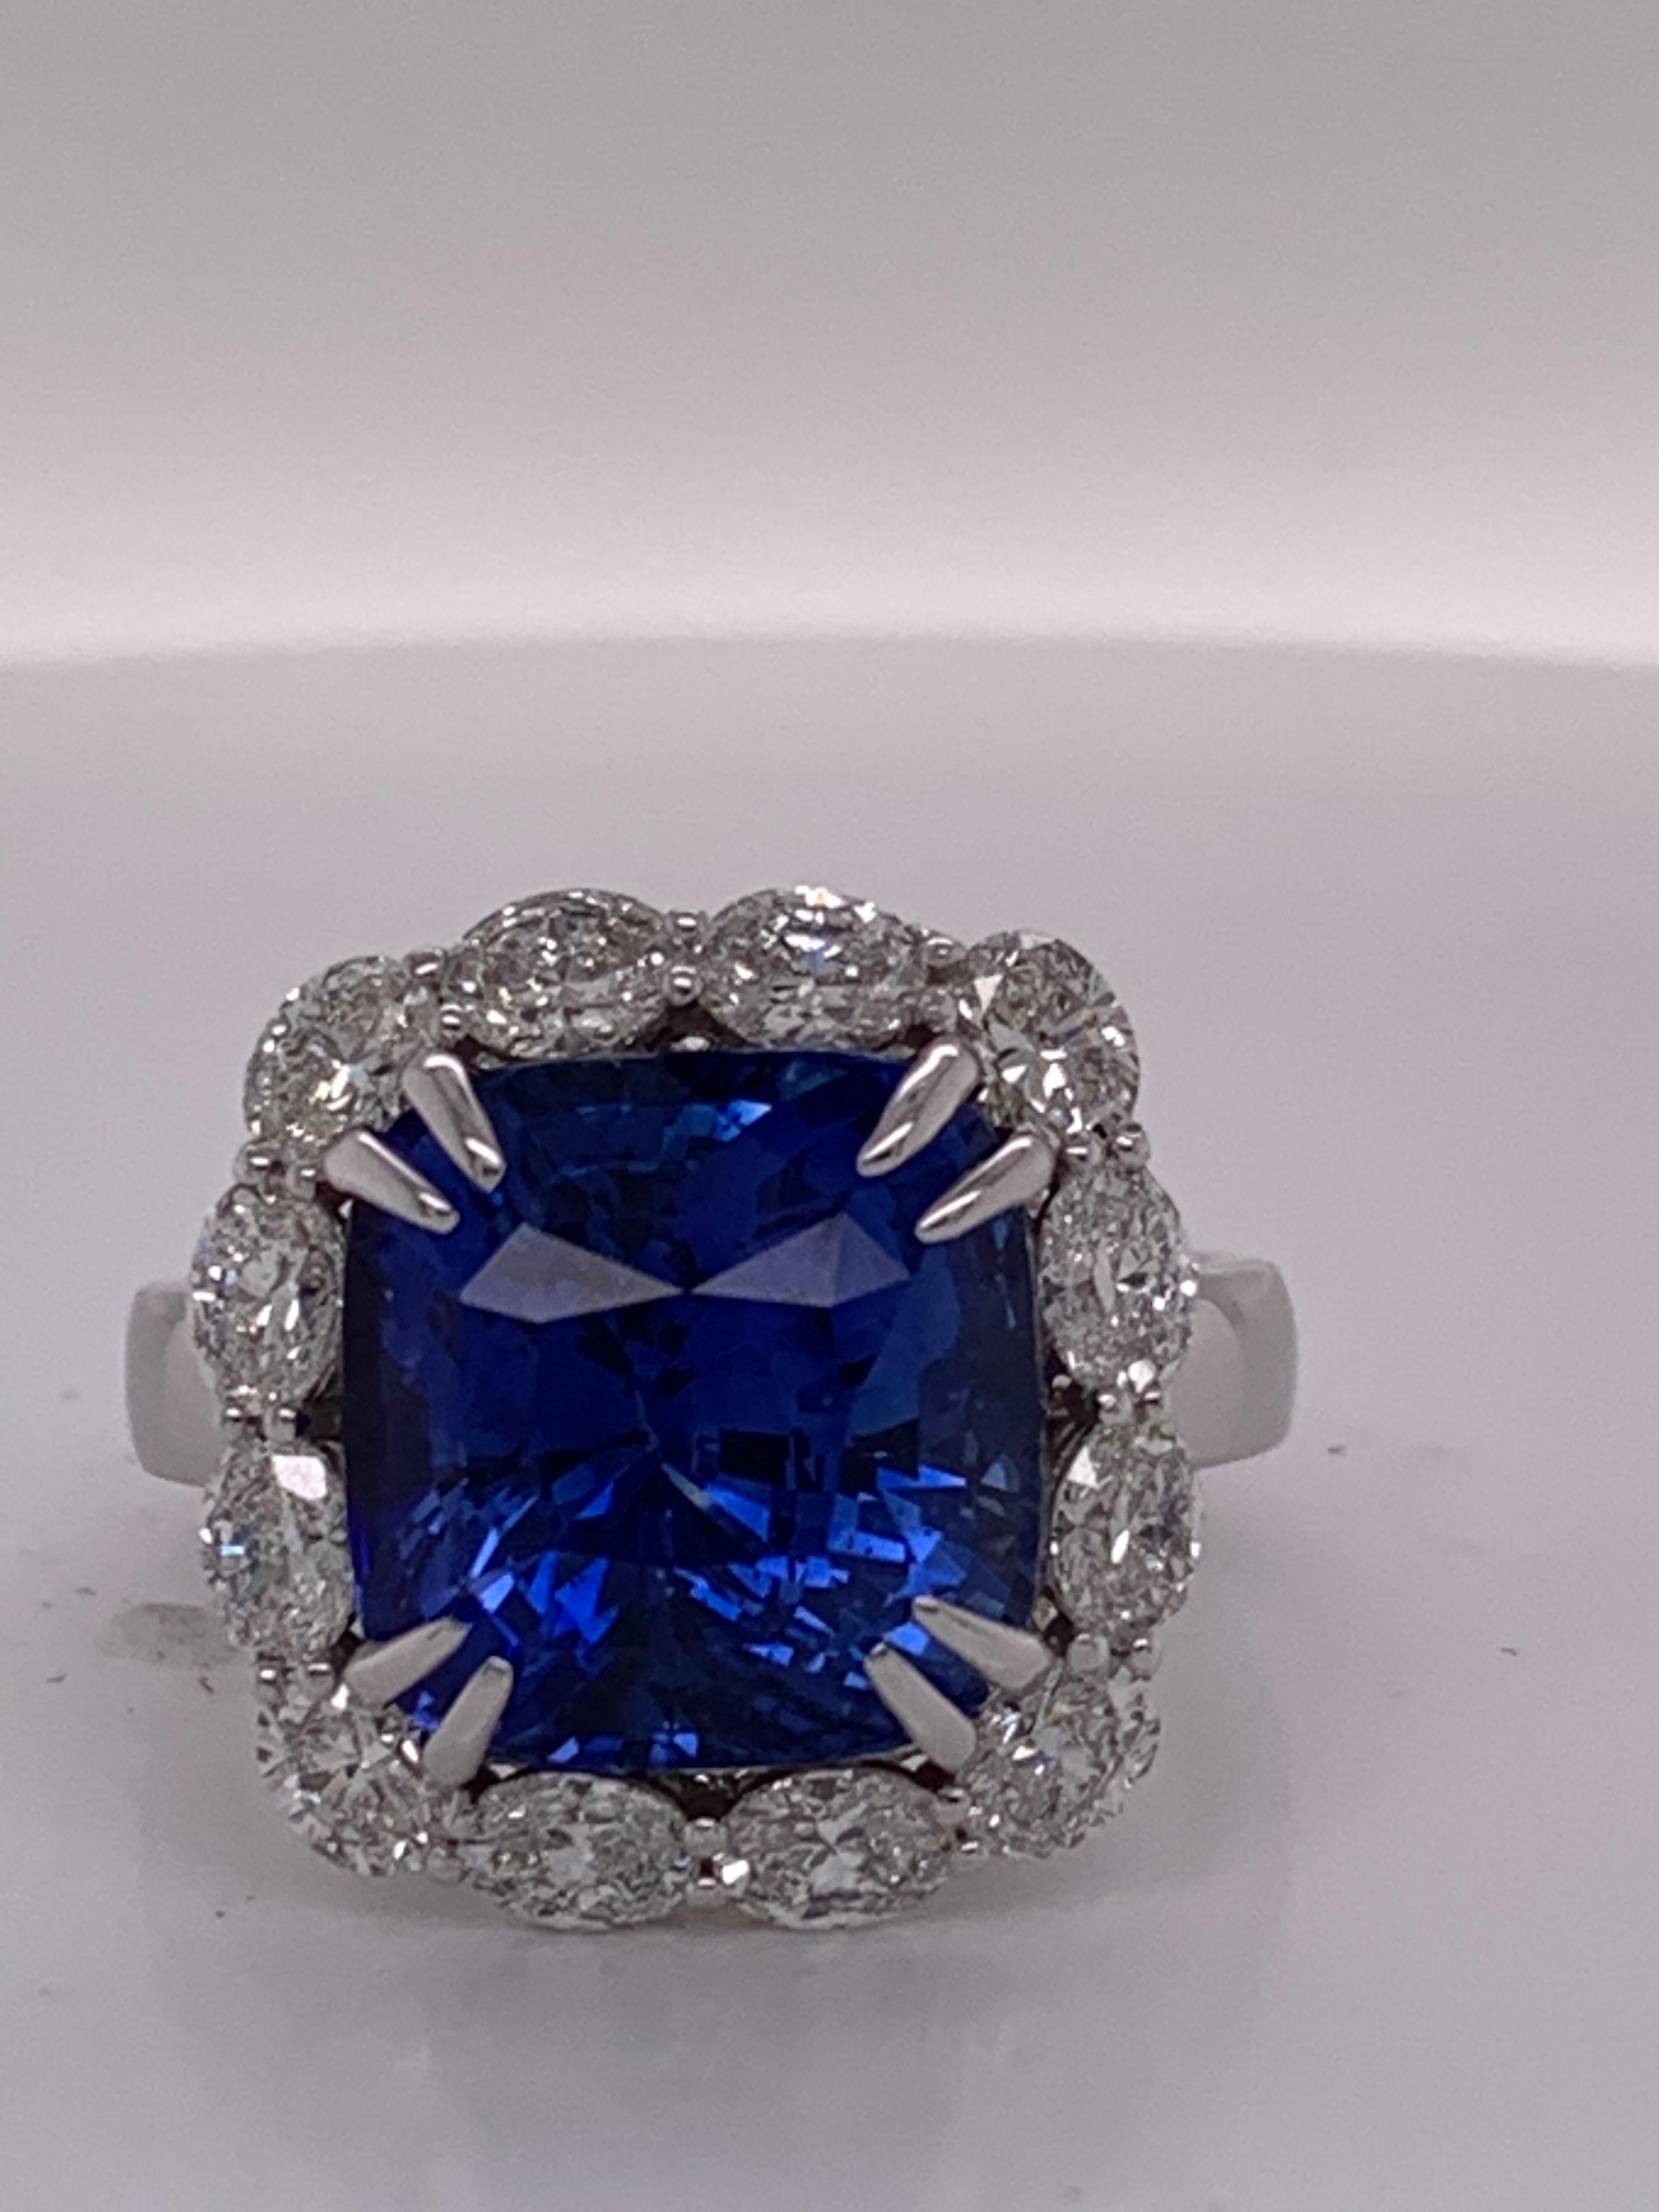 This magnificent halo ring boasts a delightful combination of blue sapphire & white diamonds. A cushion cut sapphire is set in prongs and framed by a glistening oval diamond halo. This heirloom piece is hand finished by our highly skilled